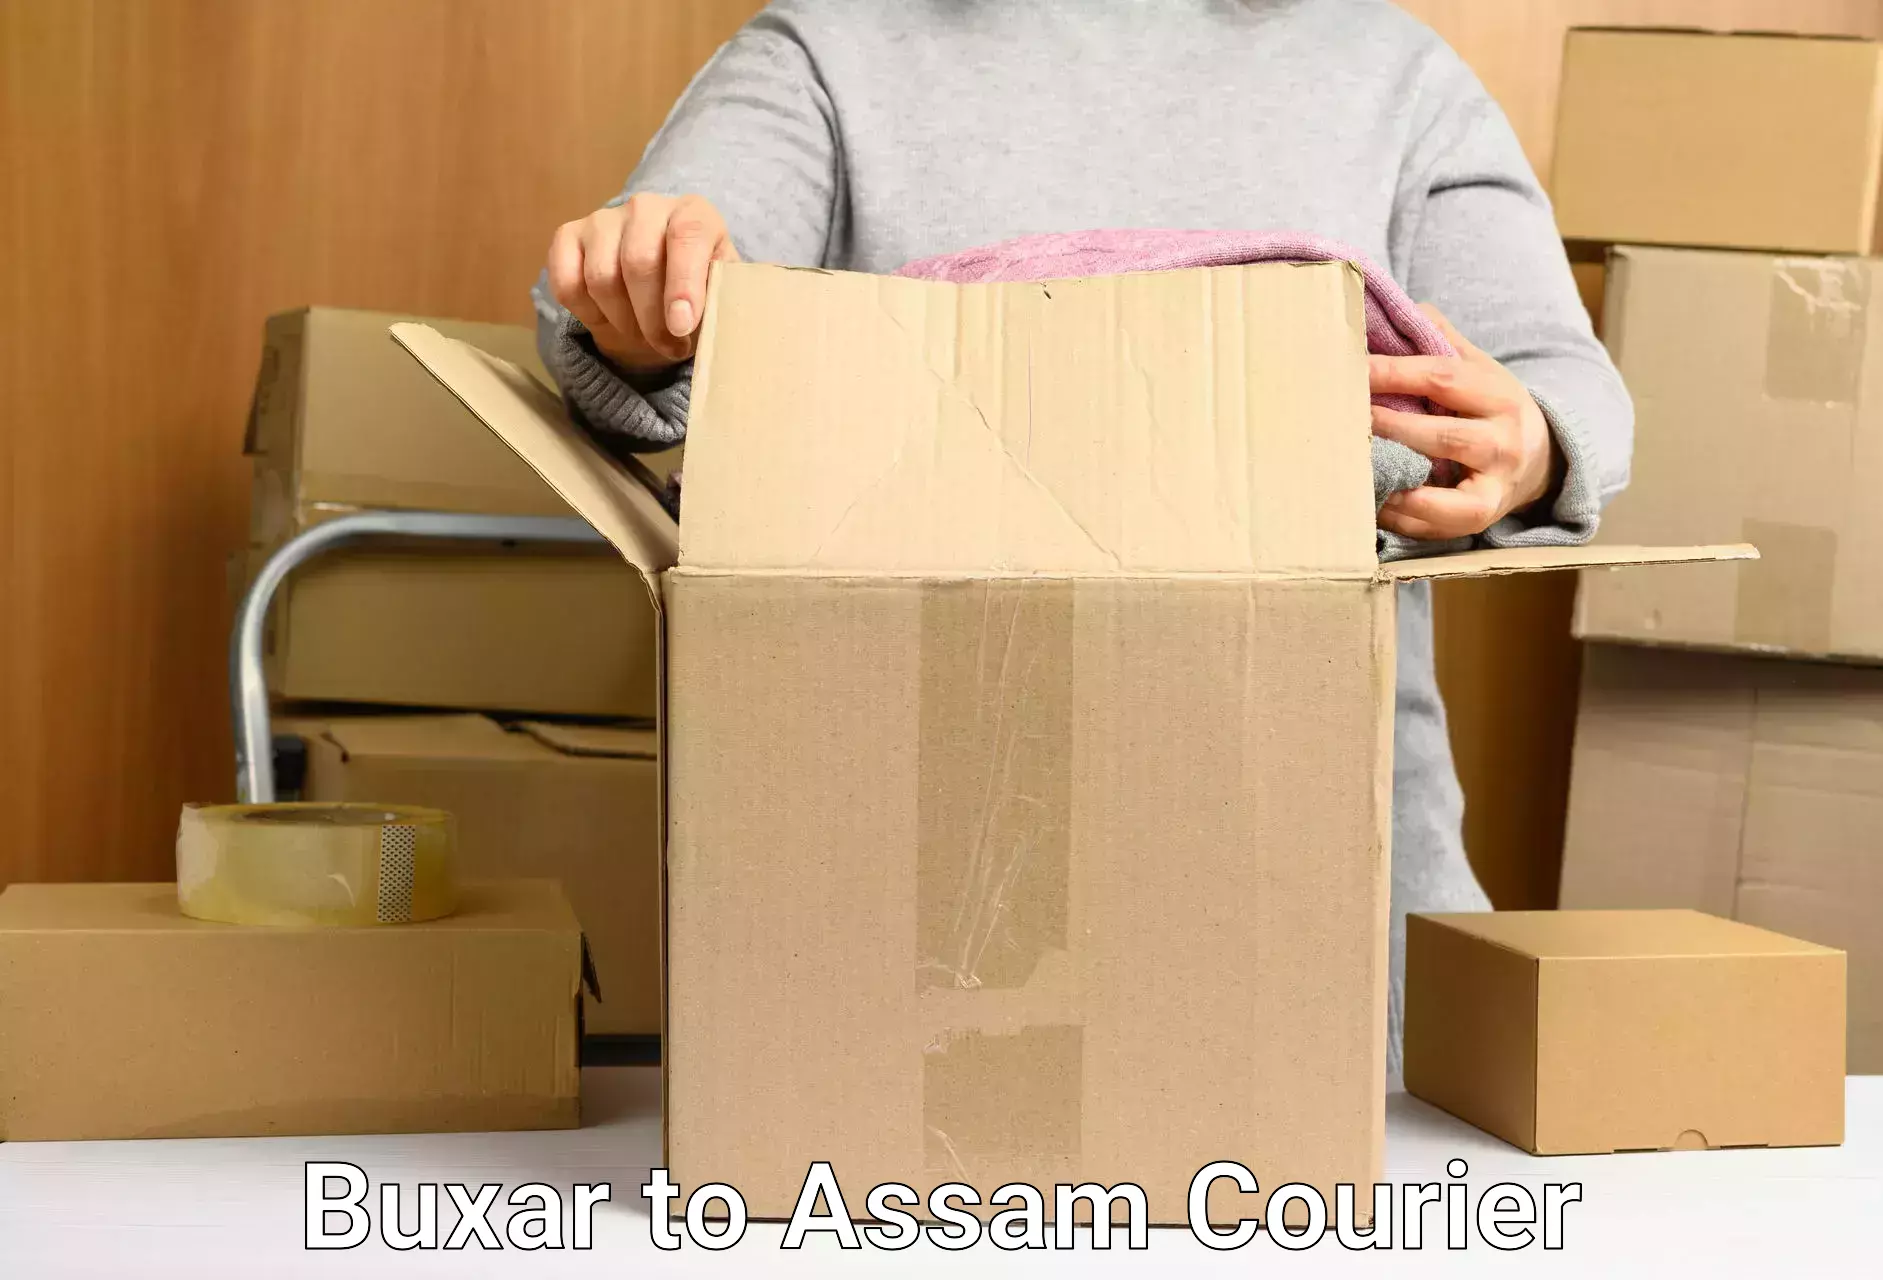 User-friendly delivery service Buxar to Morigaon